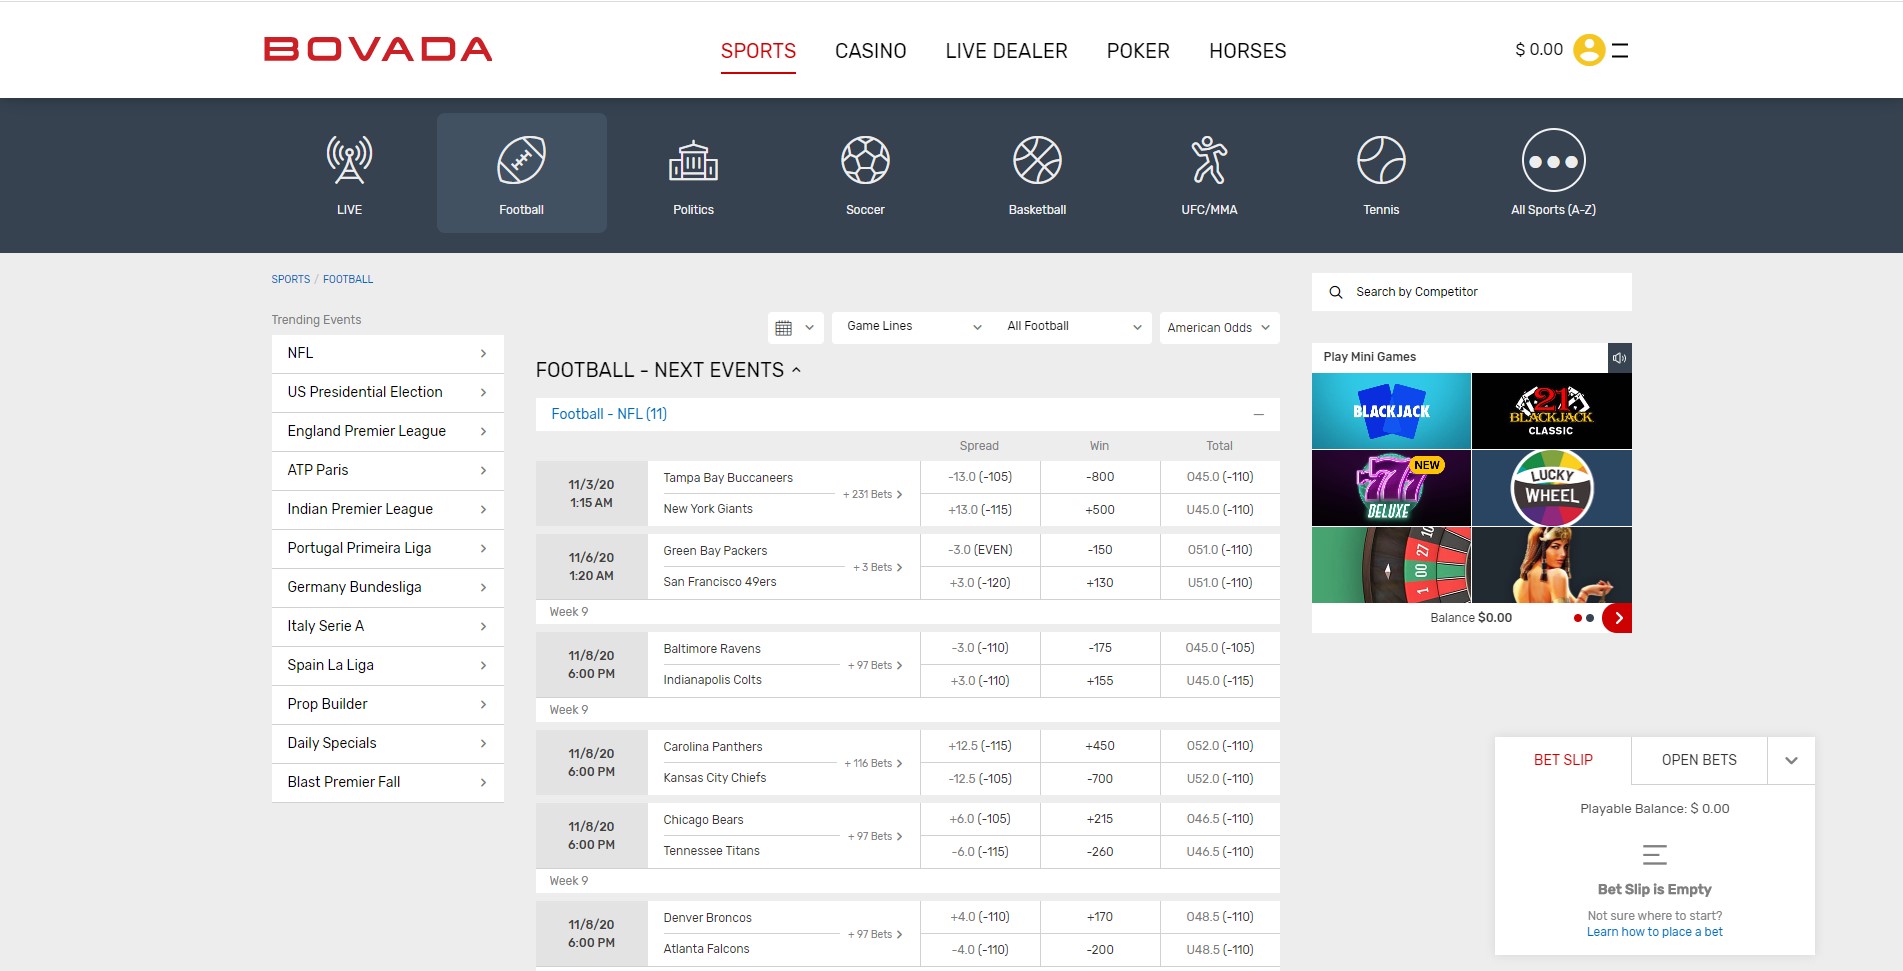 The sportsbook at Bovada and some of its football markets